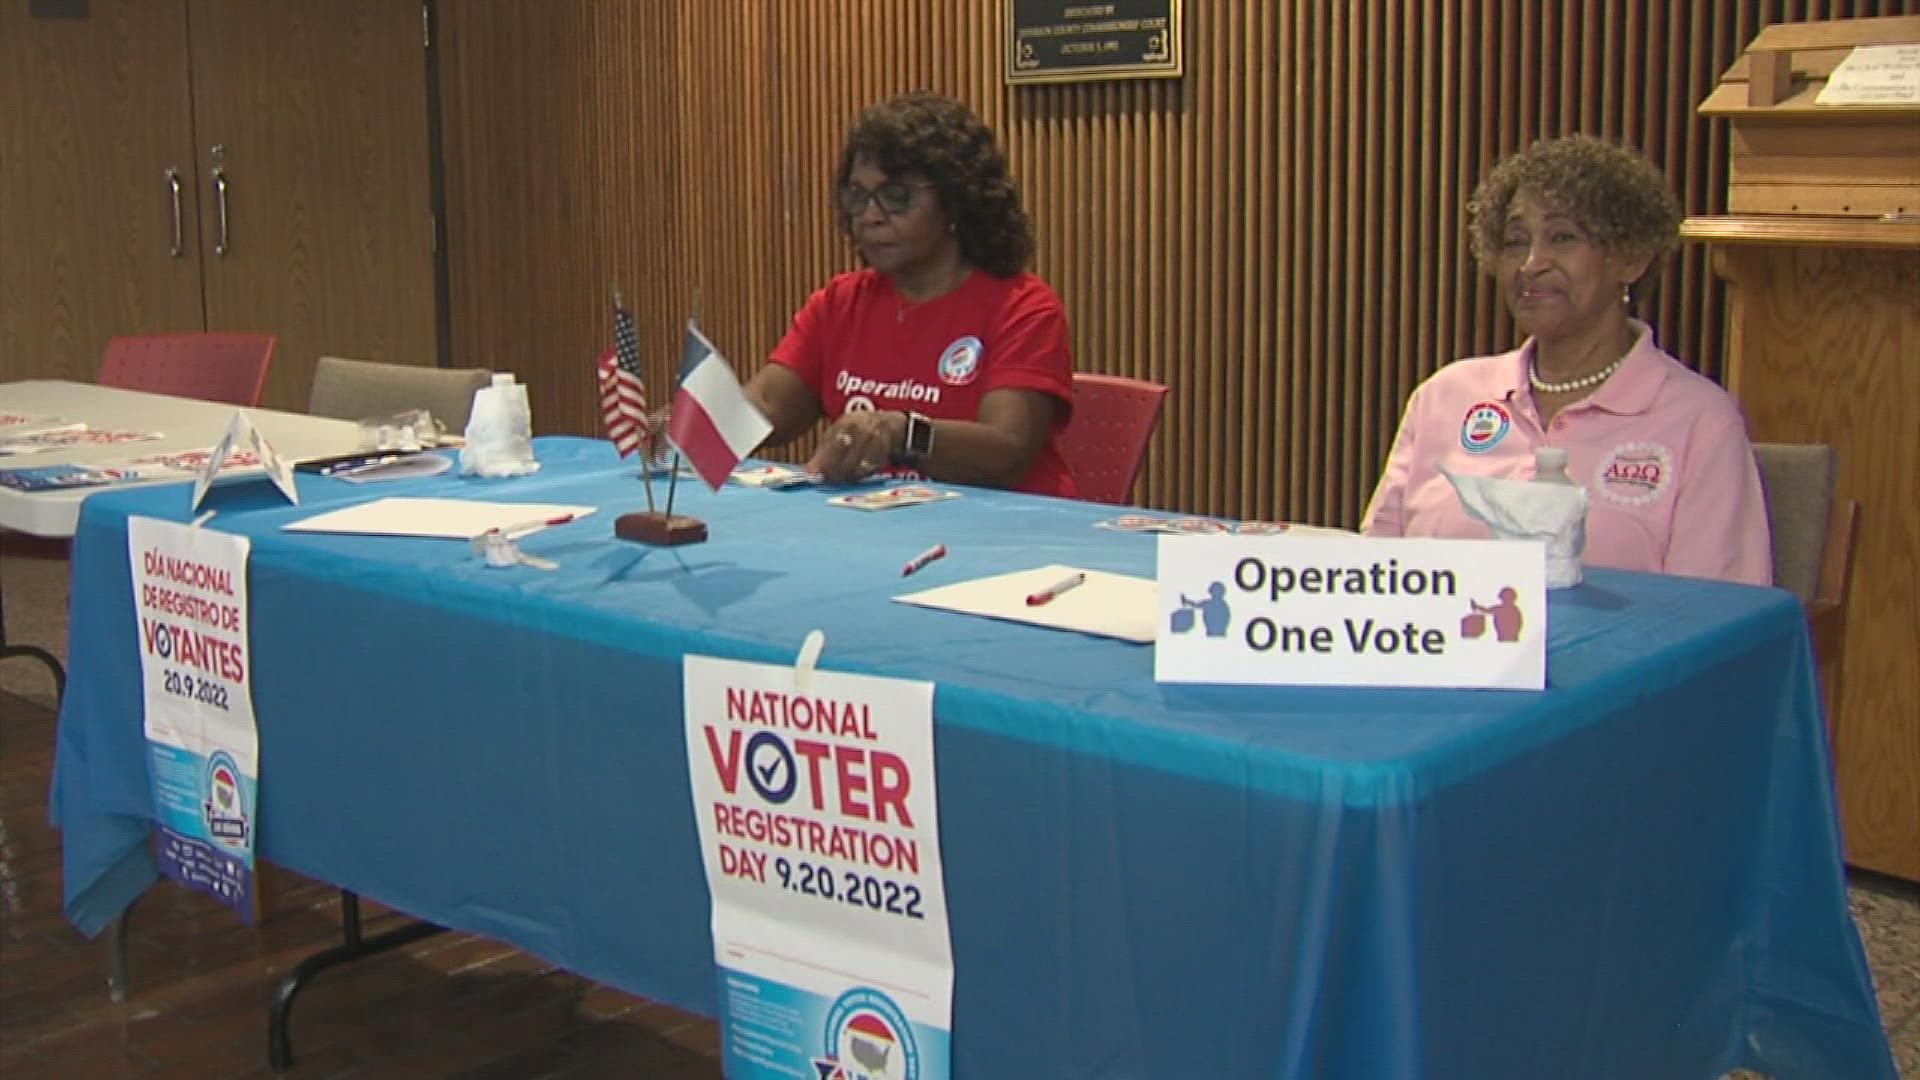 Operation one VOTE, Inc. is hosting an event in honor of the 10th anniversary of National Voter Registration Day.